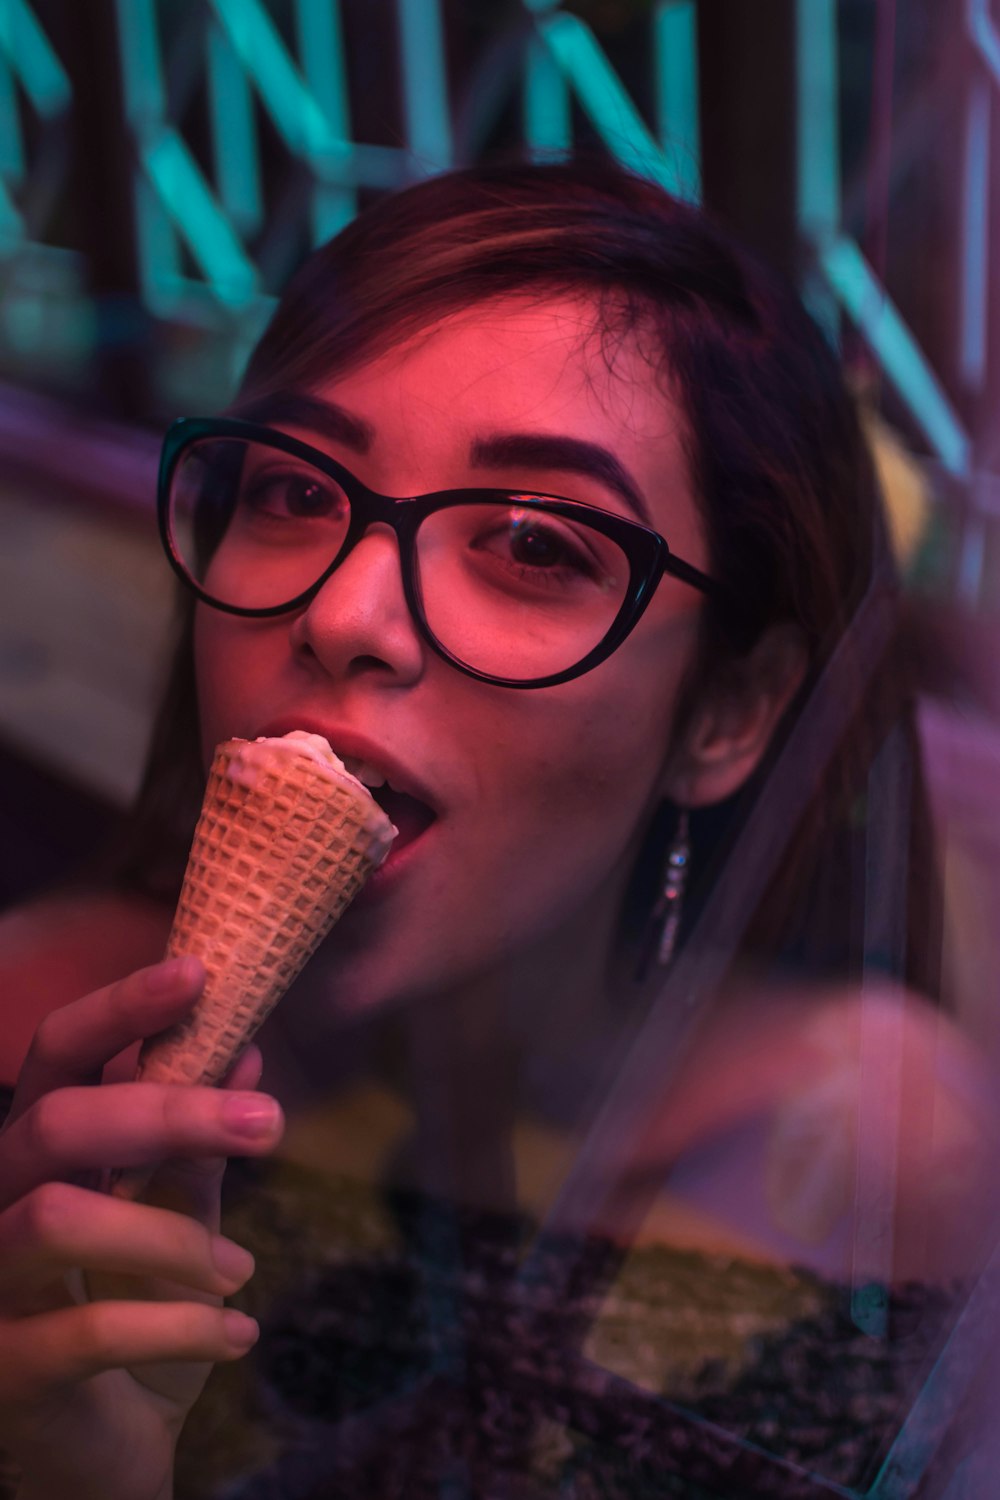 woman eating ice cream holding cone